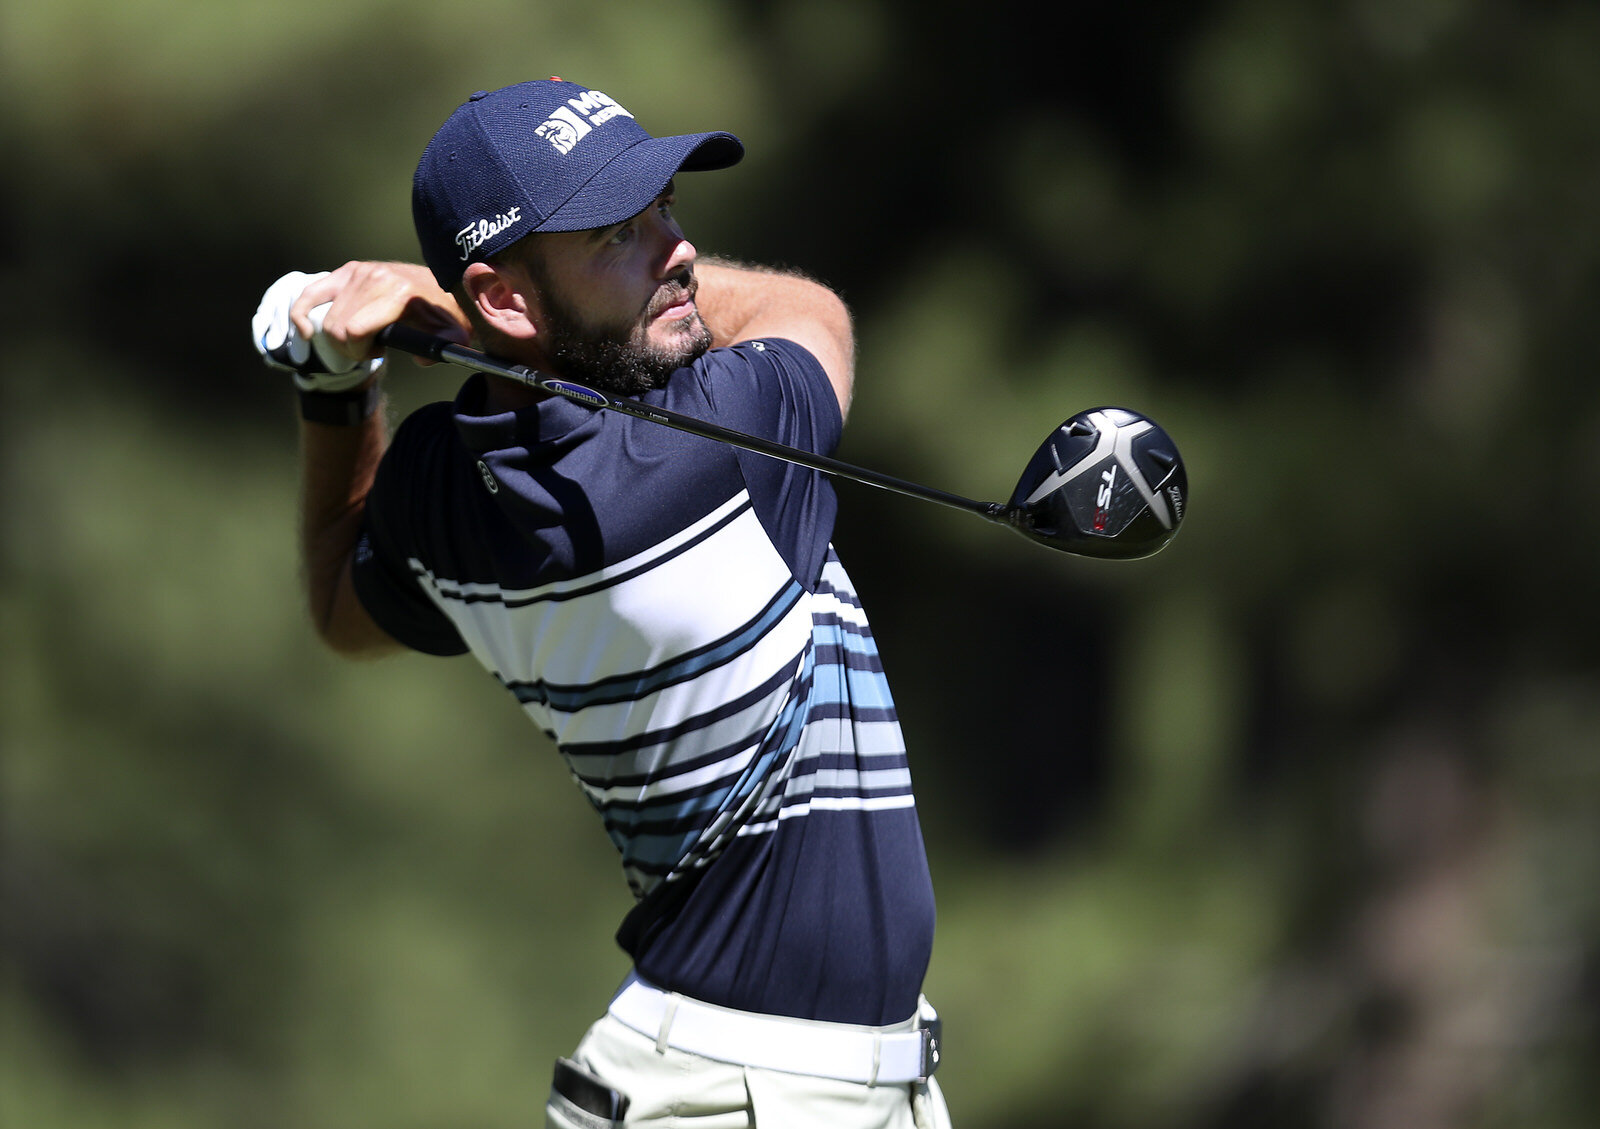  TRUCKEE, CALIFORNIA - AUGUST 01: Troy Merritt plays his shot from the sixth tee during the third round of the Barracuda Championship at Tahoe Mountain Club's Old Greenwood Golf Course on August 01, 2020 in Truckee, California. (Photo by Jed Jacobsoh